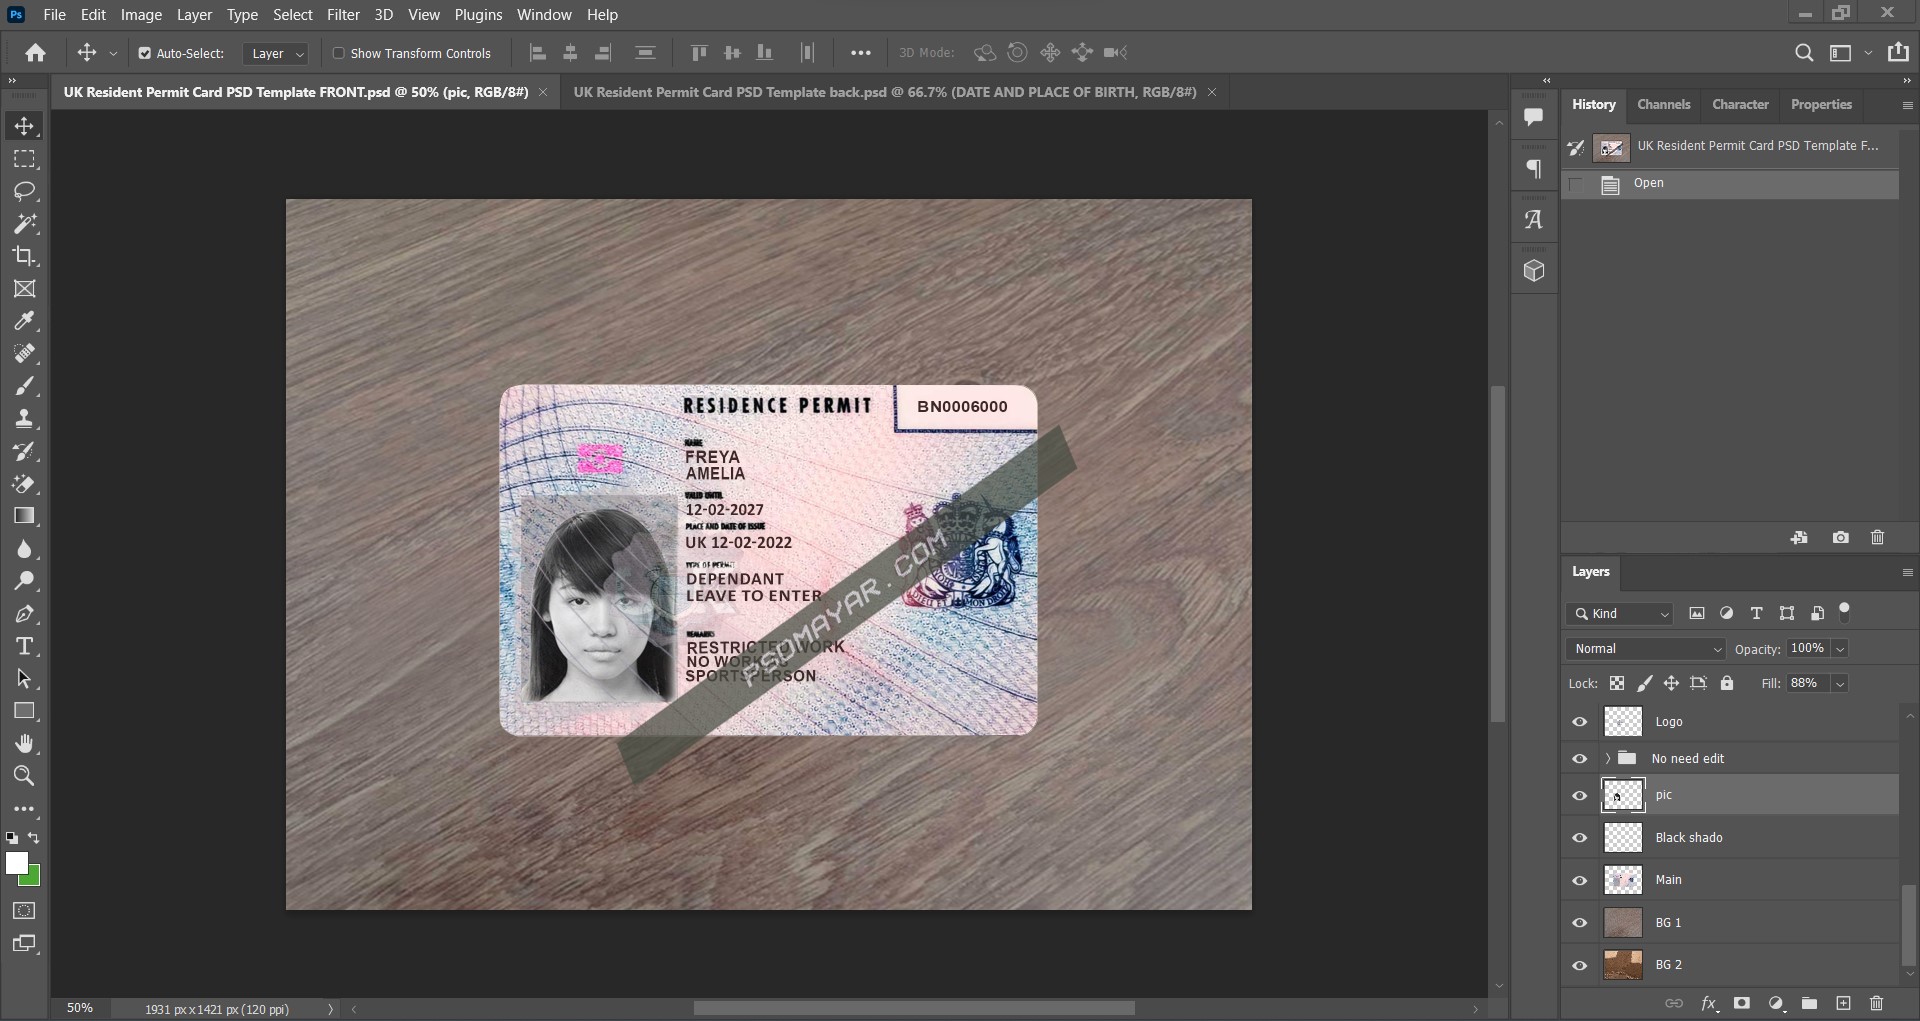 UK Resident Permit Card PSD Template